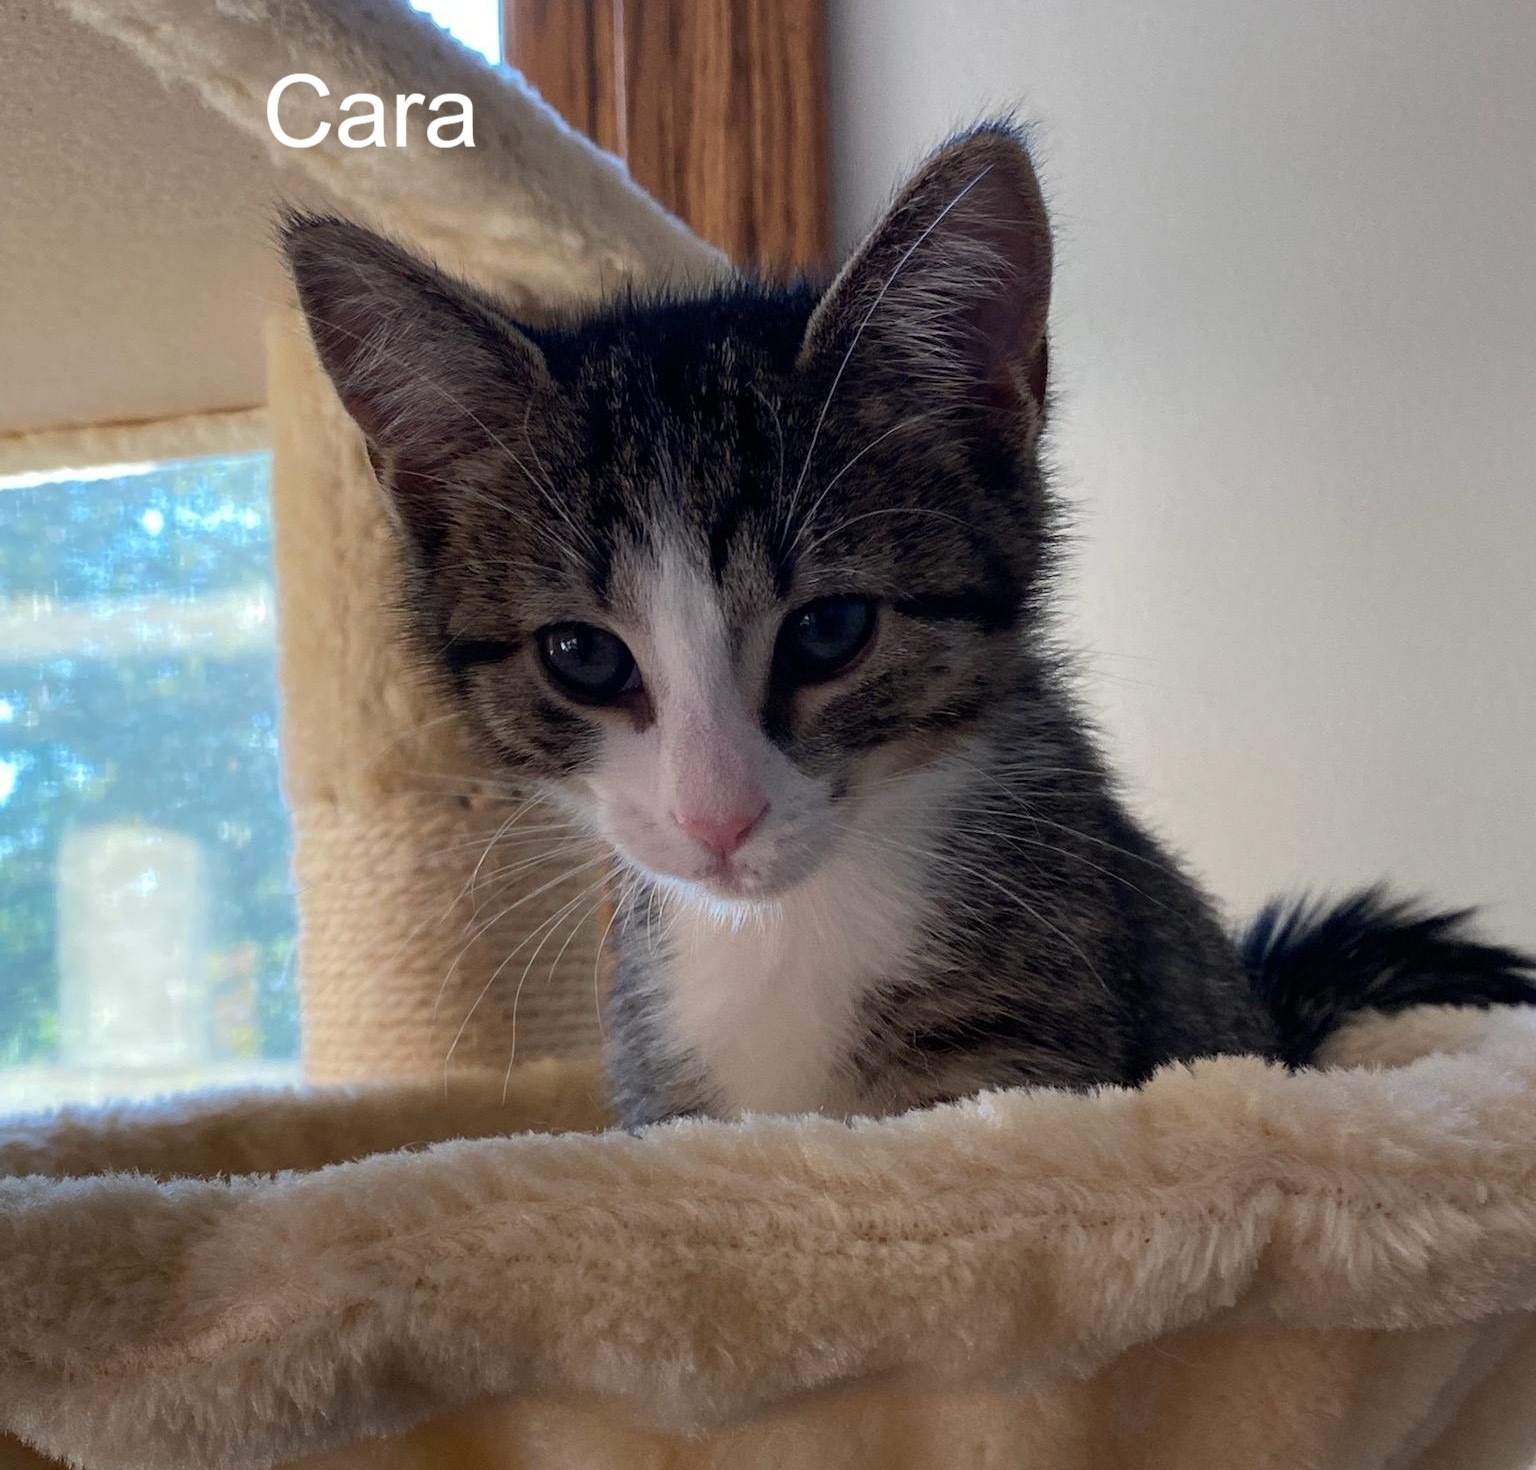 A picture of the kitten Cara